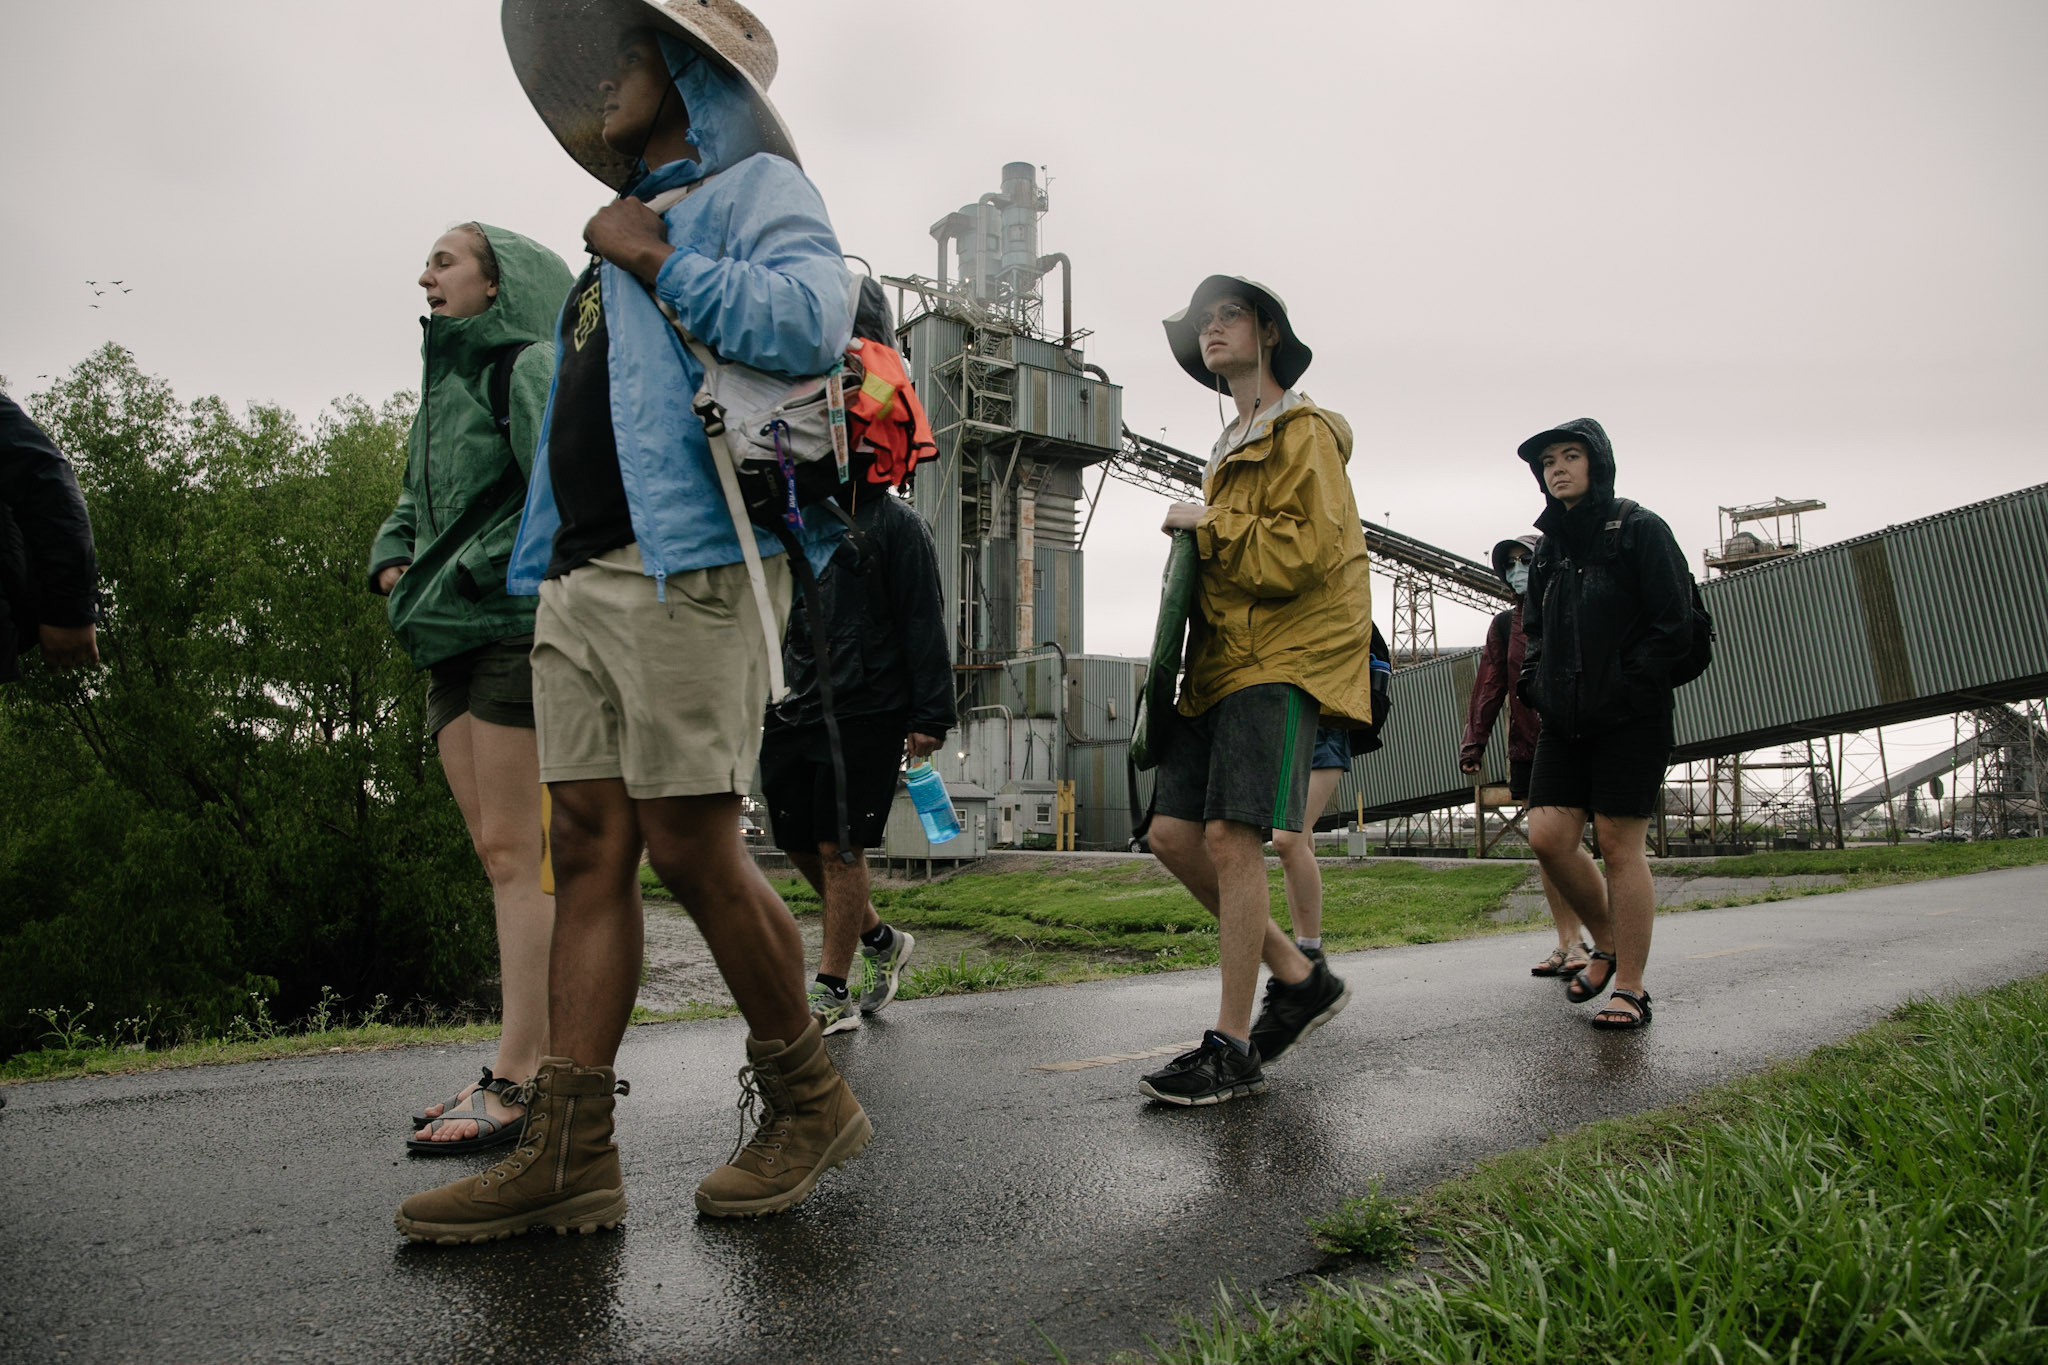 Sunrise movement activists pass by aging fossil fuel infrastructure as they walk from New Orleans to Houston, Texas.